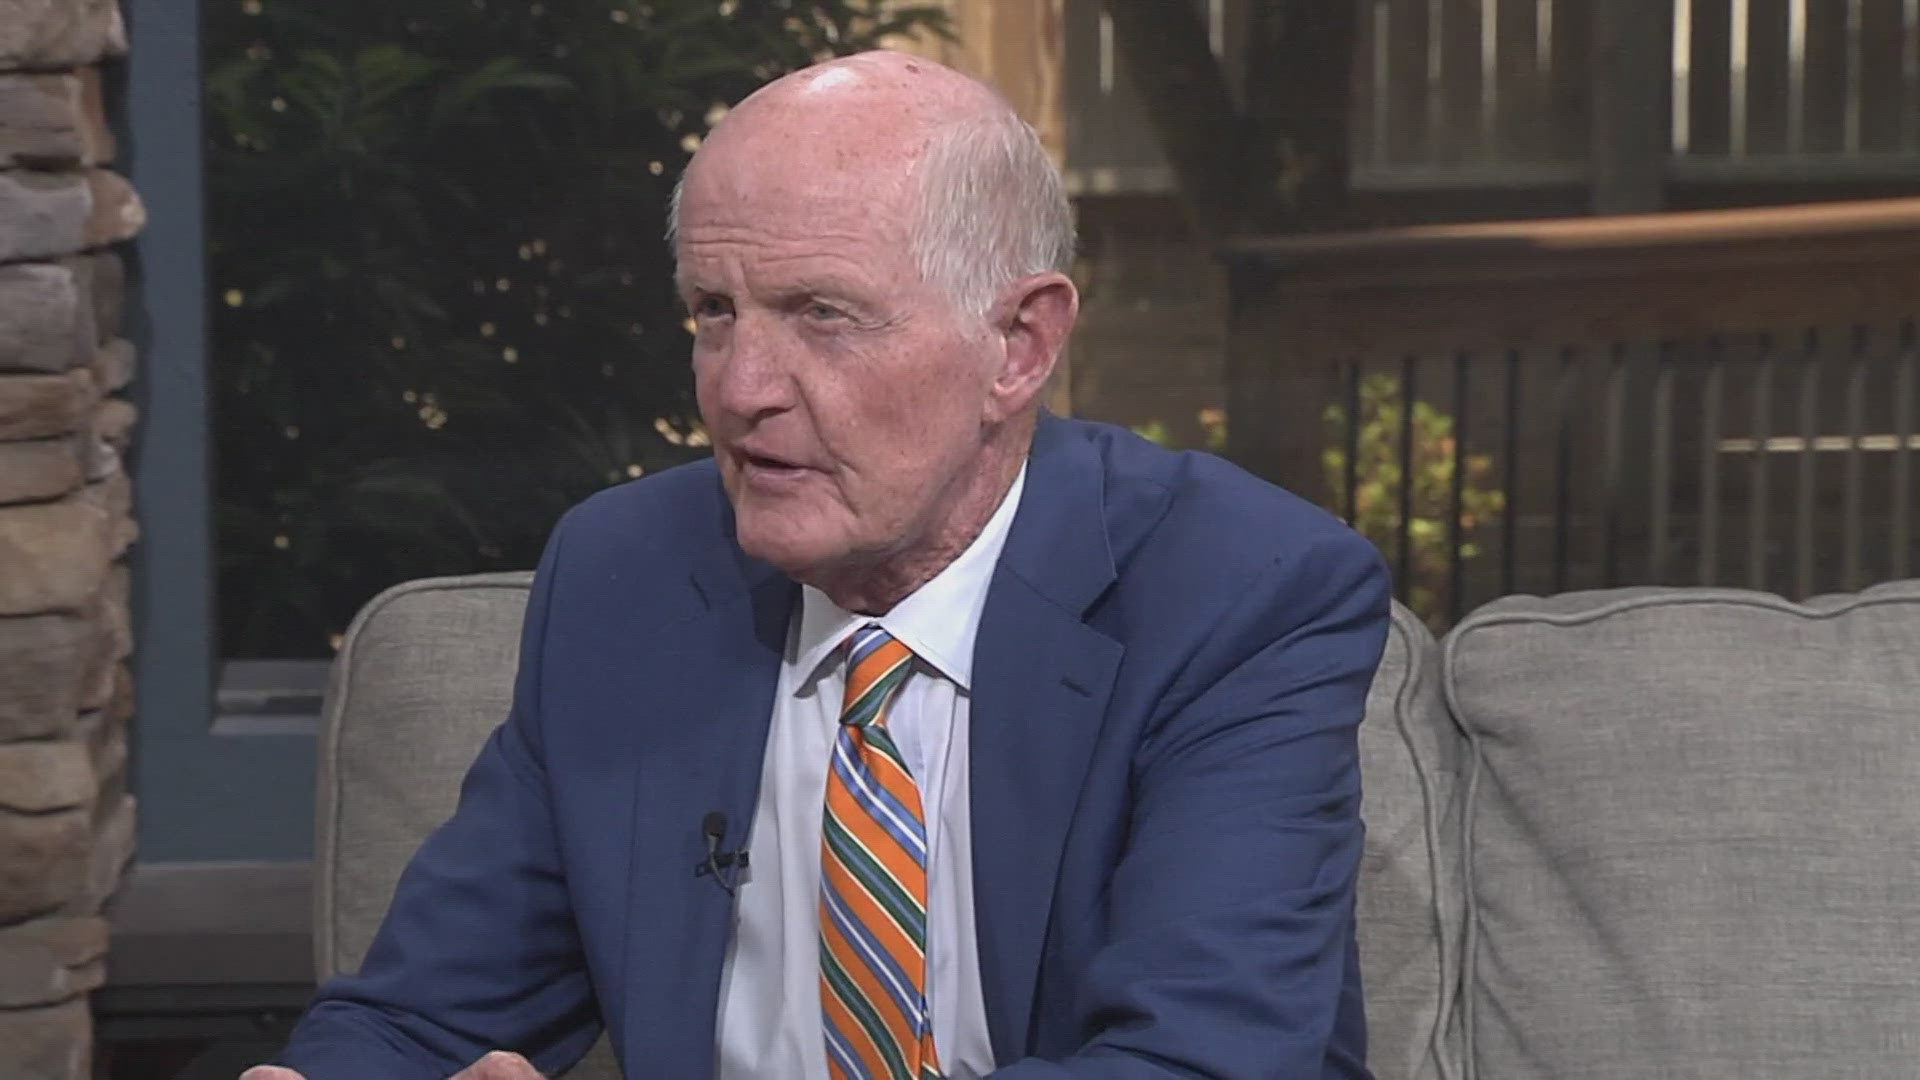 Dr. Bob quickly developed a great relationship with WBIR, thanks to his dependability and eagerness to help the community.